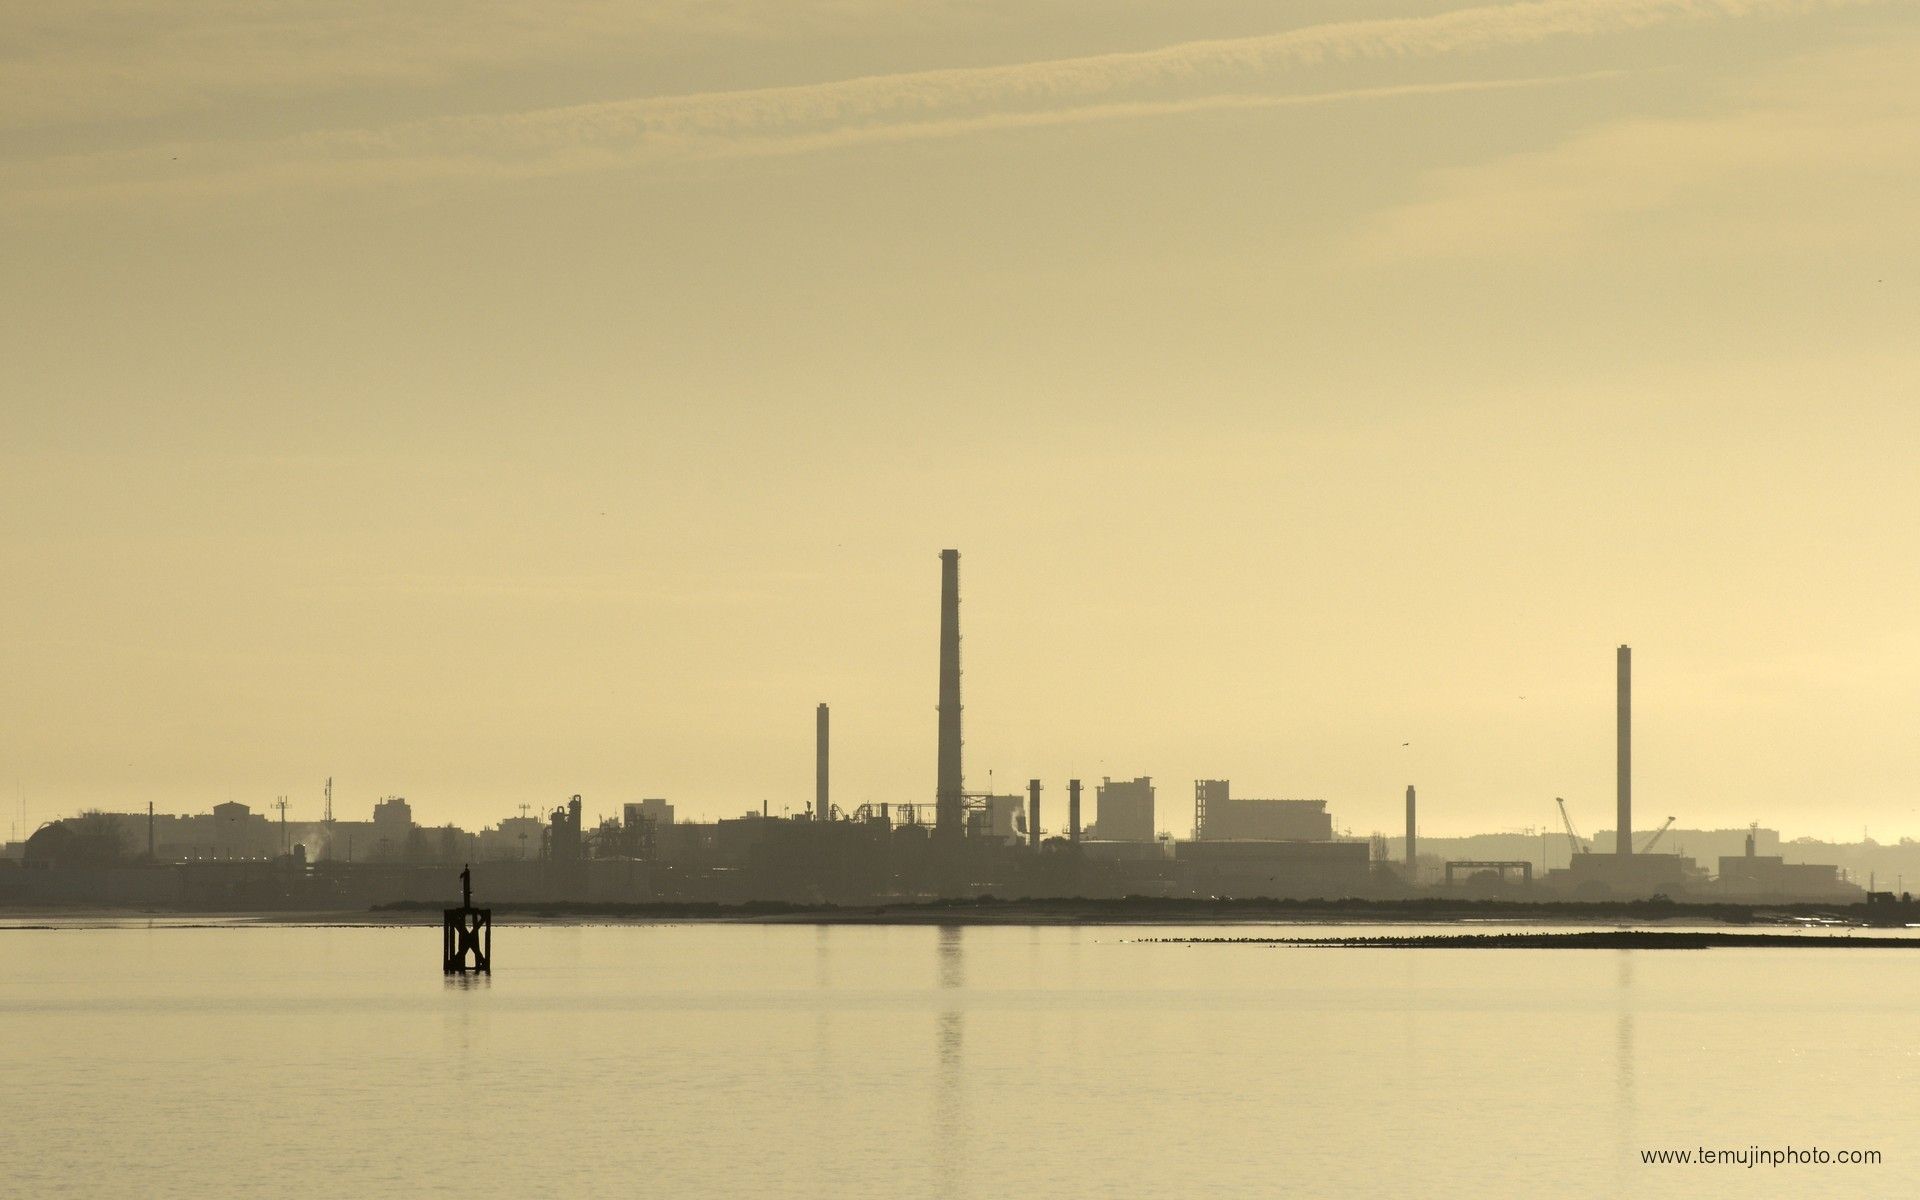 landscapes silhouette industrial industrial plants chimneys rivers factory 1920x1200 wallpaper High Quality Wallpaper, High Definition Wallpaper